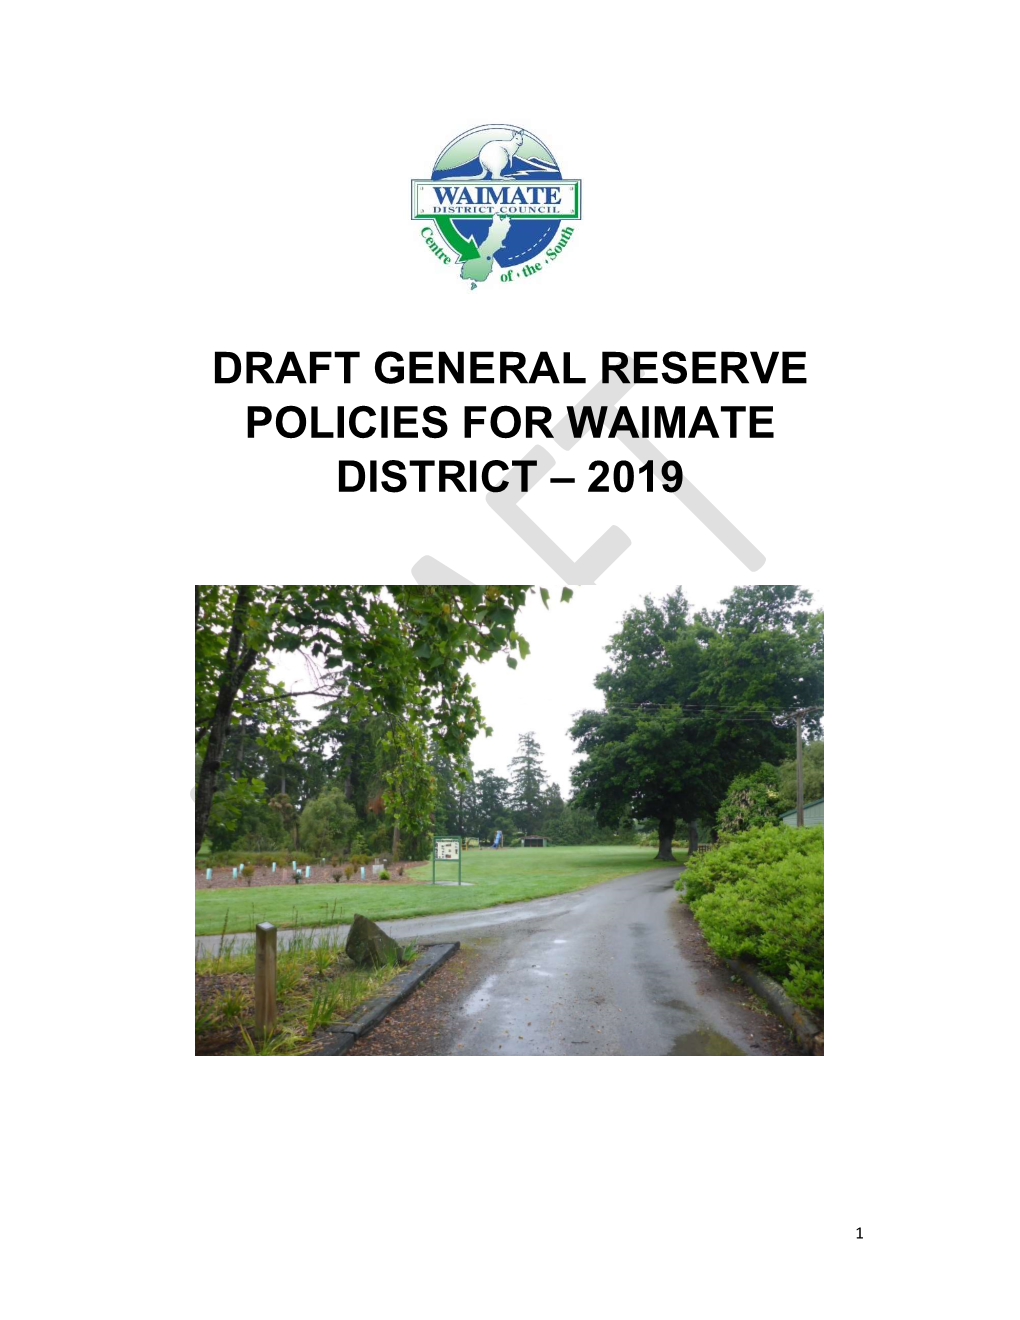 Draft General Reserve Policies for Waimate District – 2019